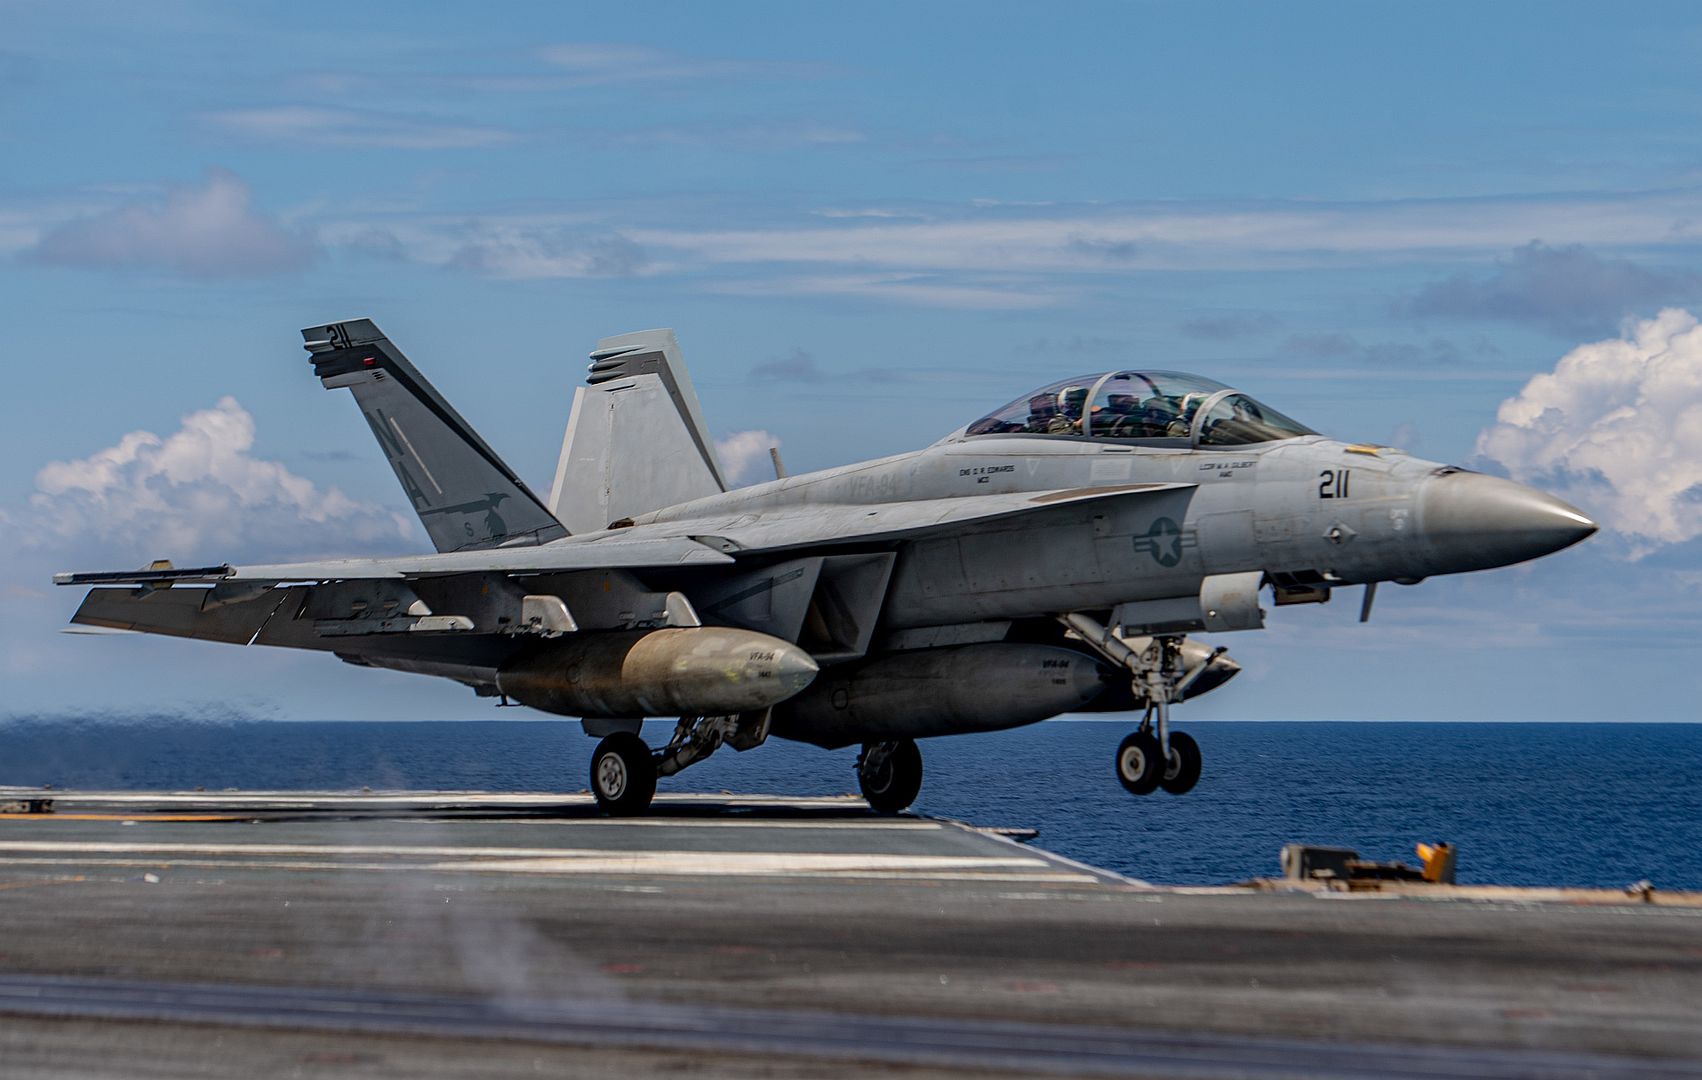  94 Launches From The Flight Deck Of The Aircraft Carrier USS Nimitz KKJaSwkp8iWWNv31gGdrty